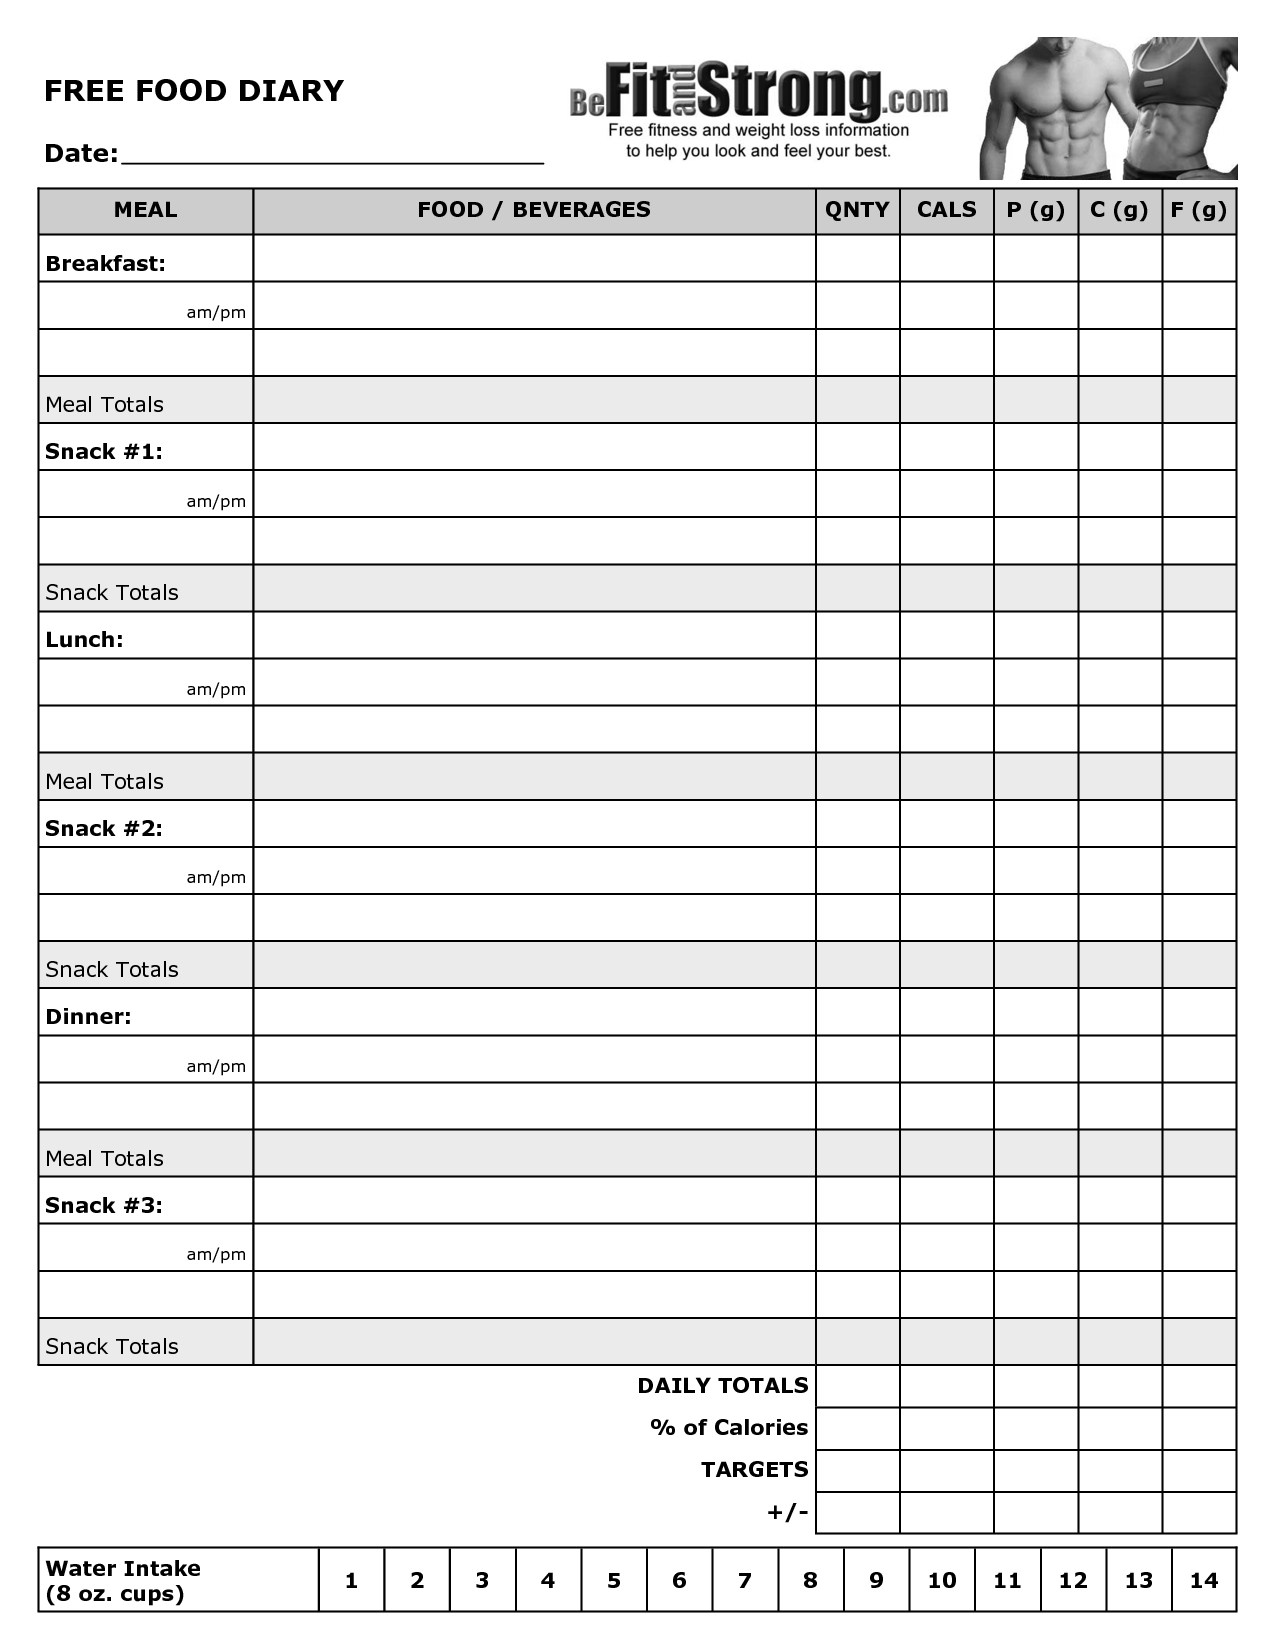 Free Printable Food Diary Template | Health, Fitness &amp; Weight Loss - Free Printable Calorie Counter Sheet